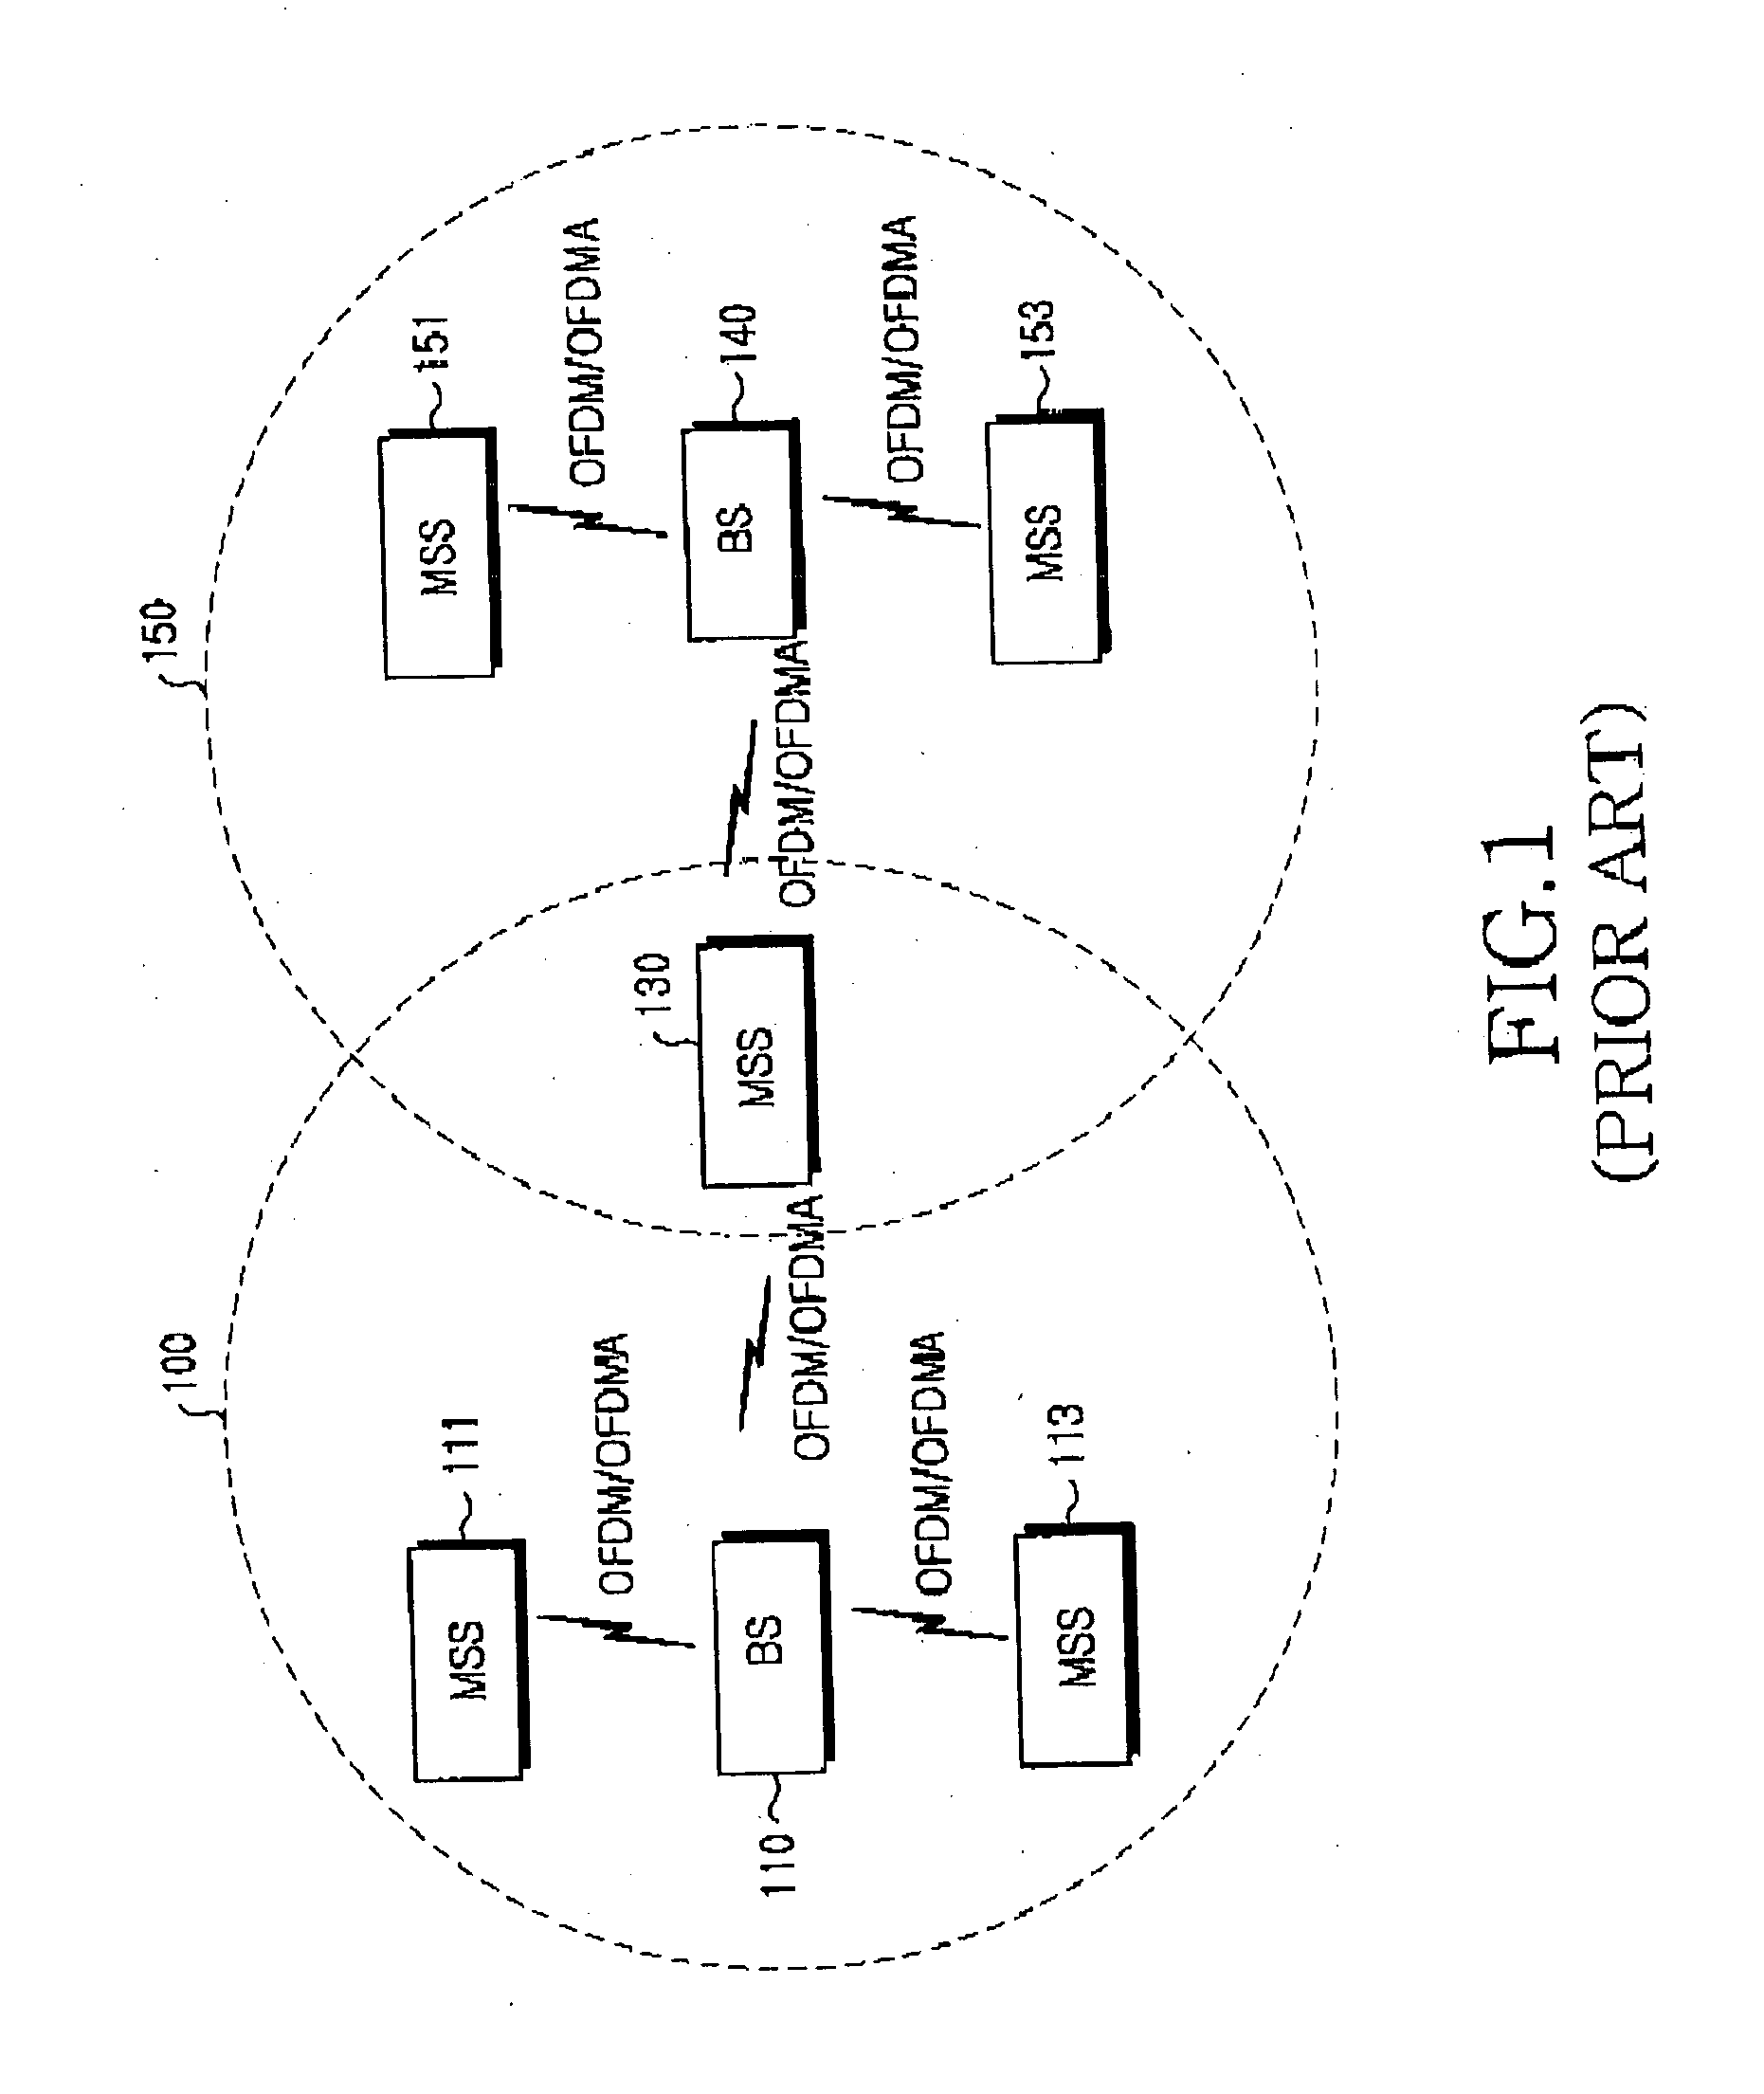 System and method for optimizing handover in mobile communication system